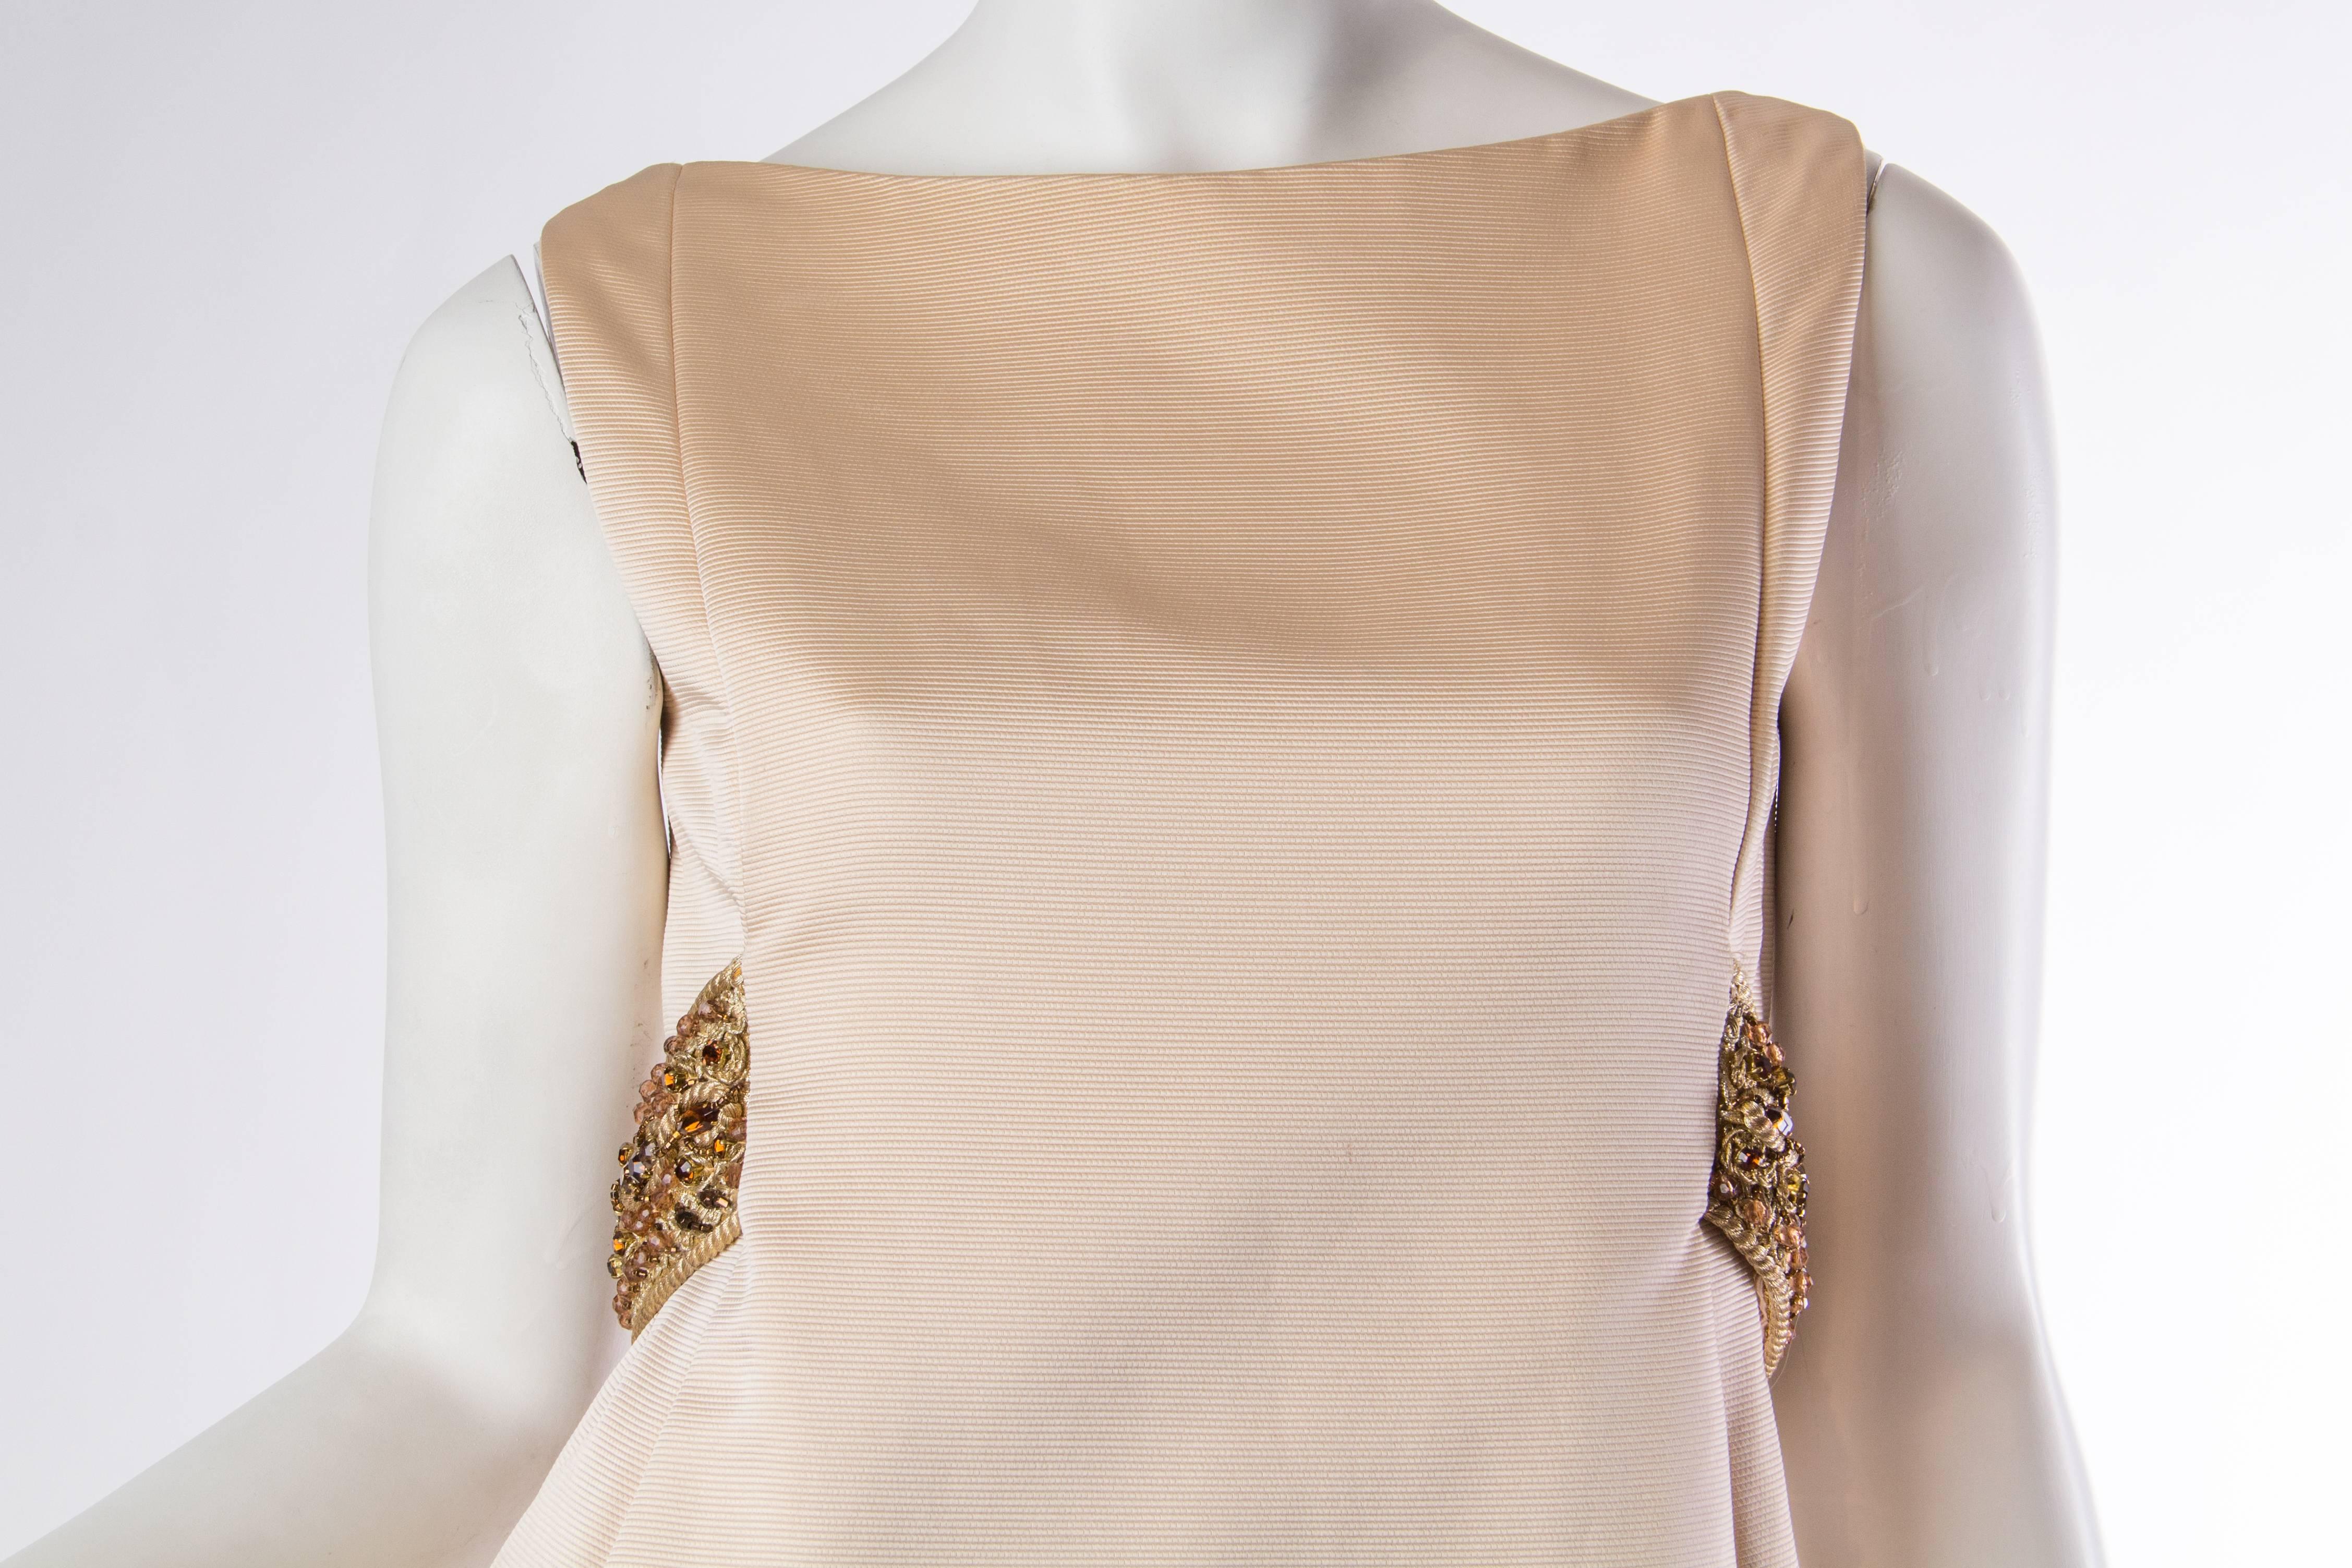 Beautifully cut 1960s Dress with Gold and Crystal Detailing 1